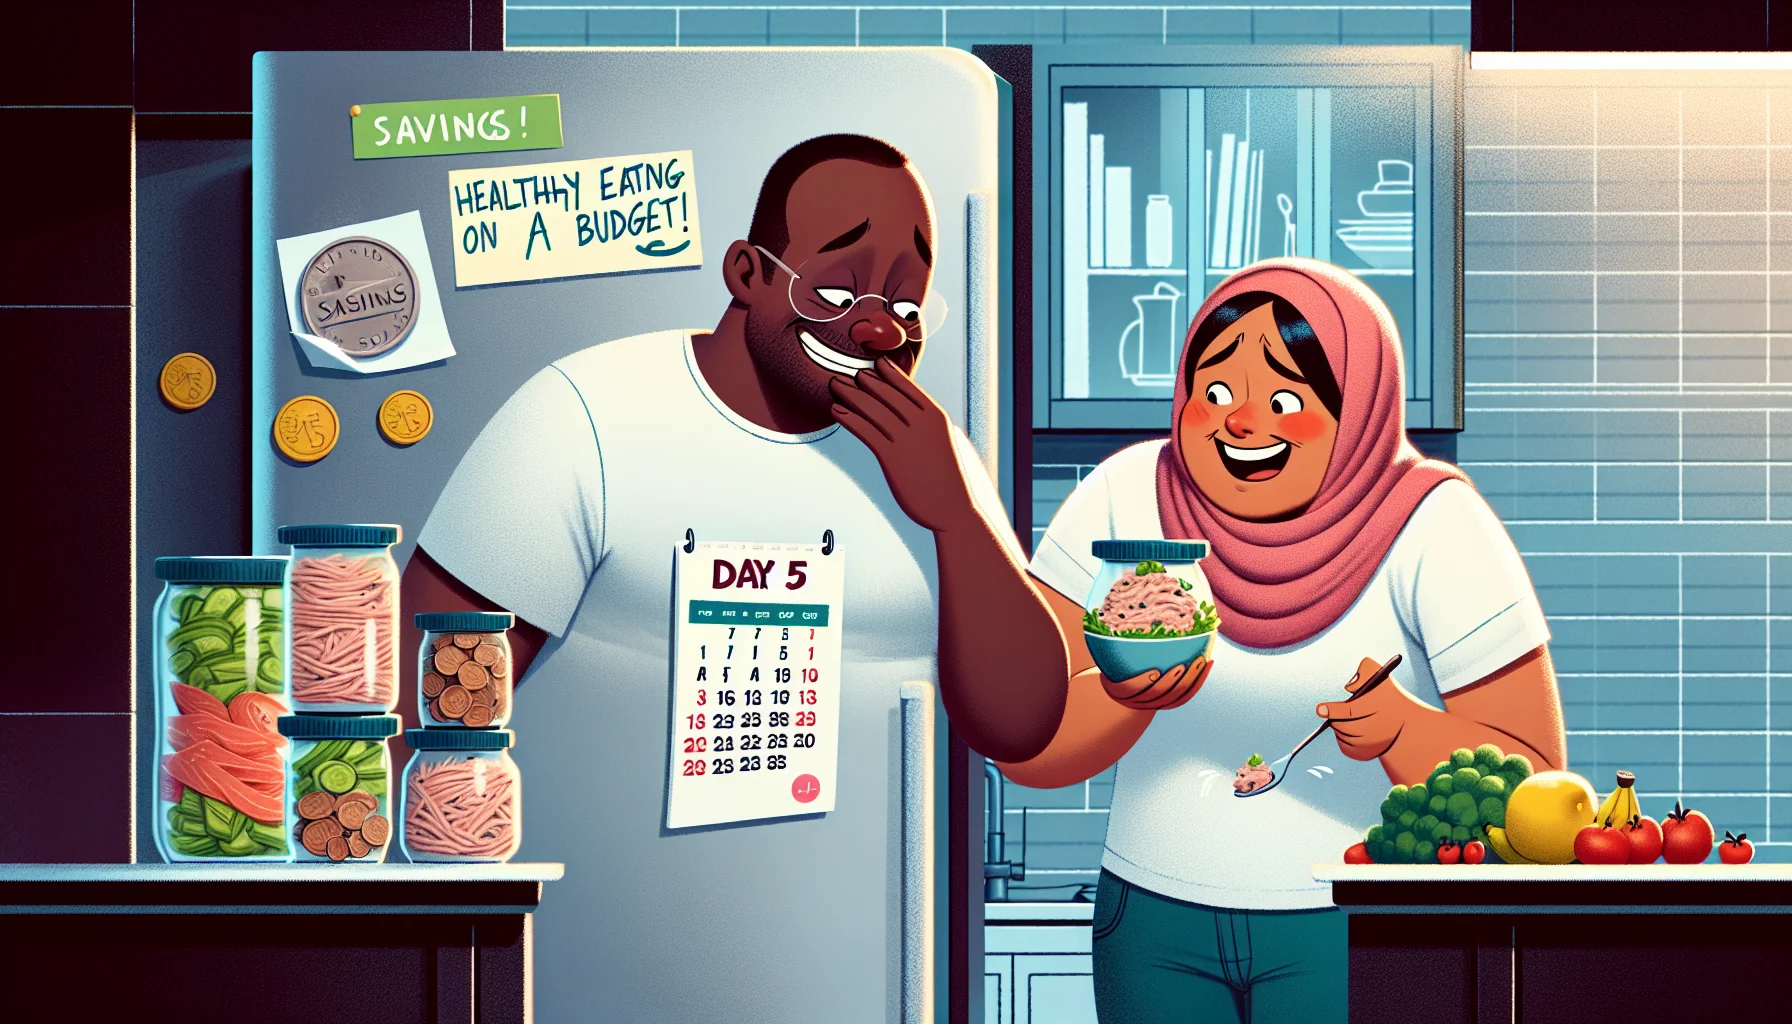 Illustrate a comical scenario in a contemporary kitchen setting. On one side, place a South Asian woman sheepishly looking at a calendar marked 'Day 5', while holding onto a jar of tuna salad. On the other side, depict a Black man chuckling while casually eating a fresh bowl of tuna salad. In the background, attach a note on the fridge proclaiming 'Healthy Eating on a Budget!' and show a pile of coin jars labelled 'Savings'. The ambiance should project a light-hearted vibe, promoting healthier and economical meal options.